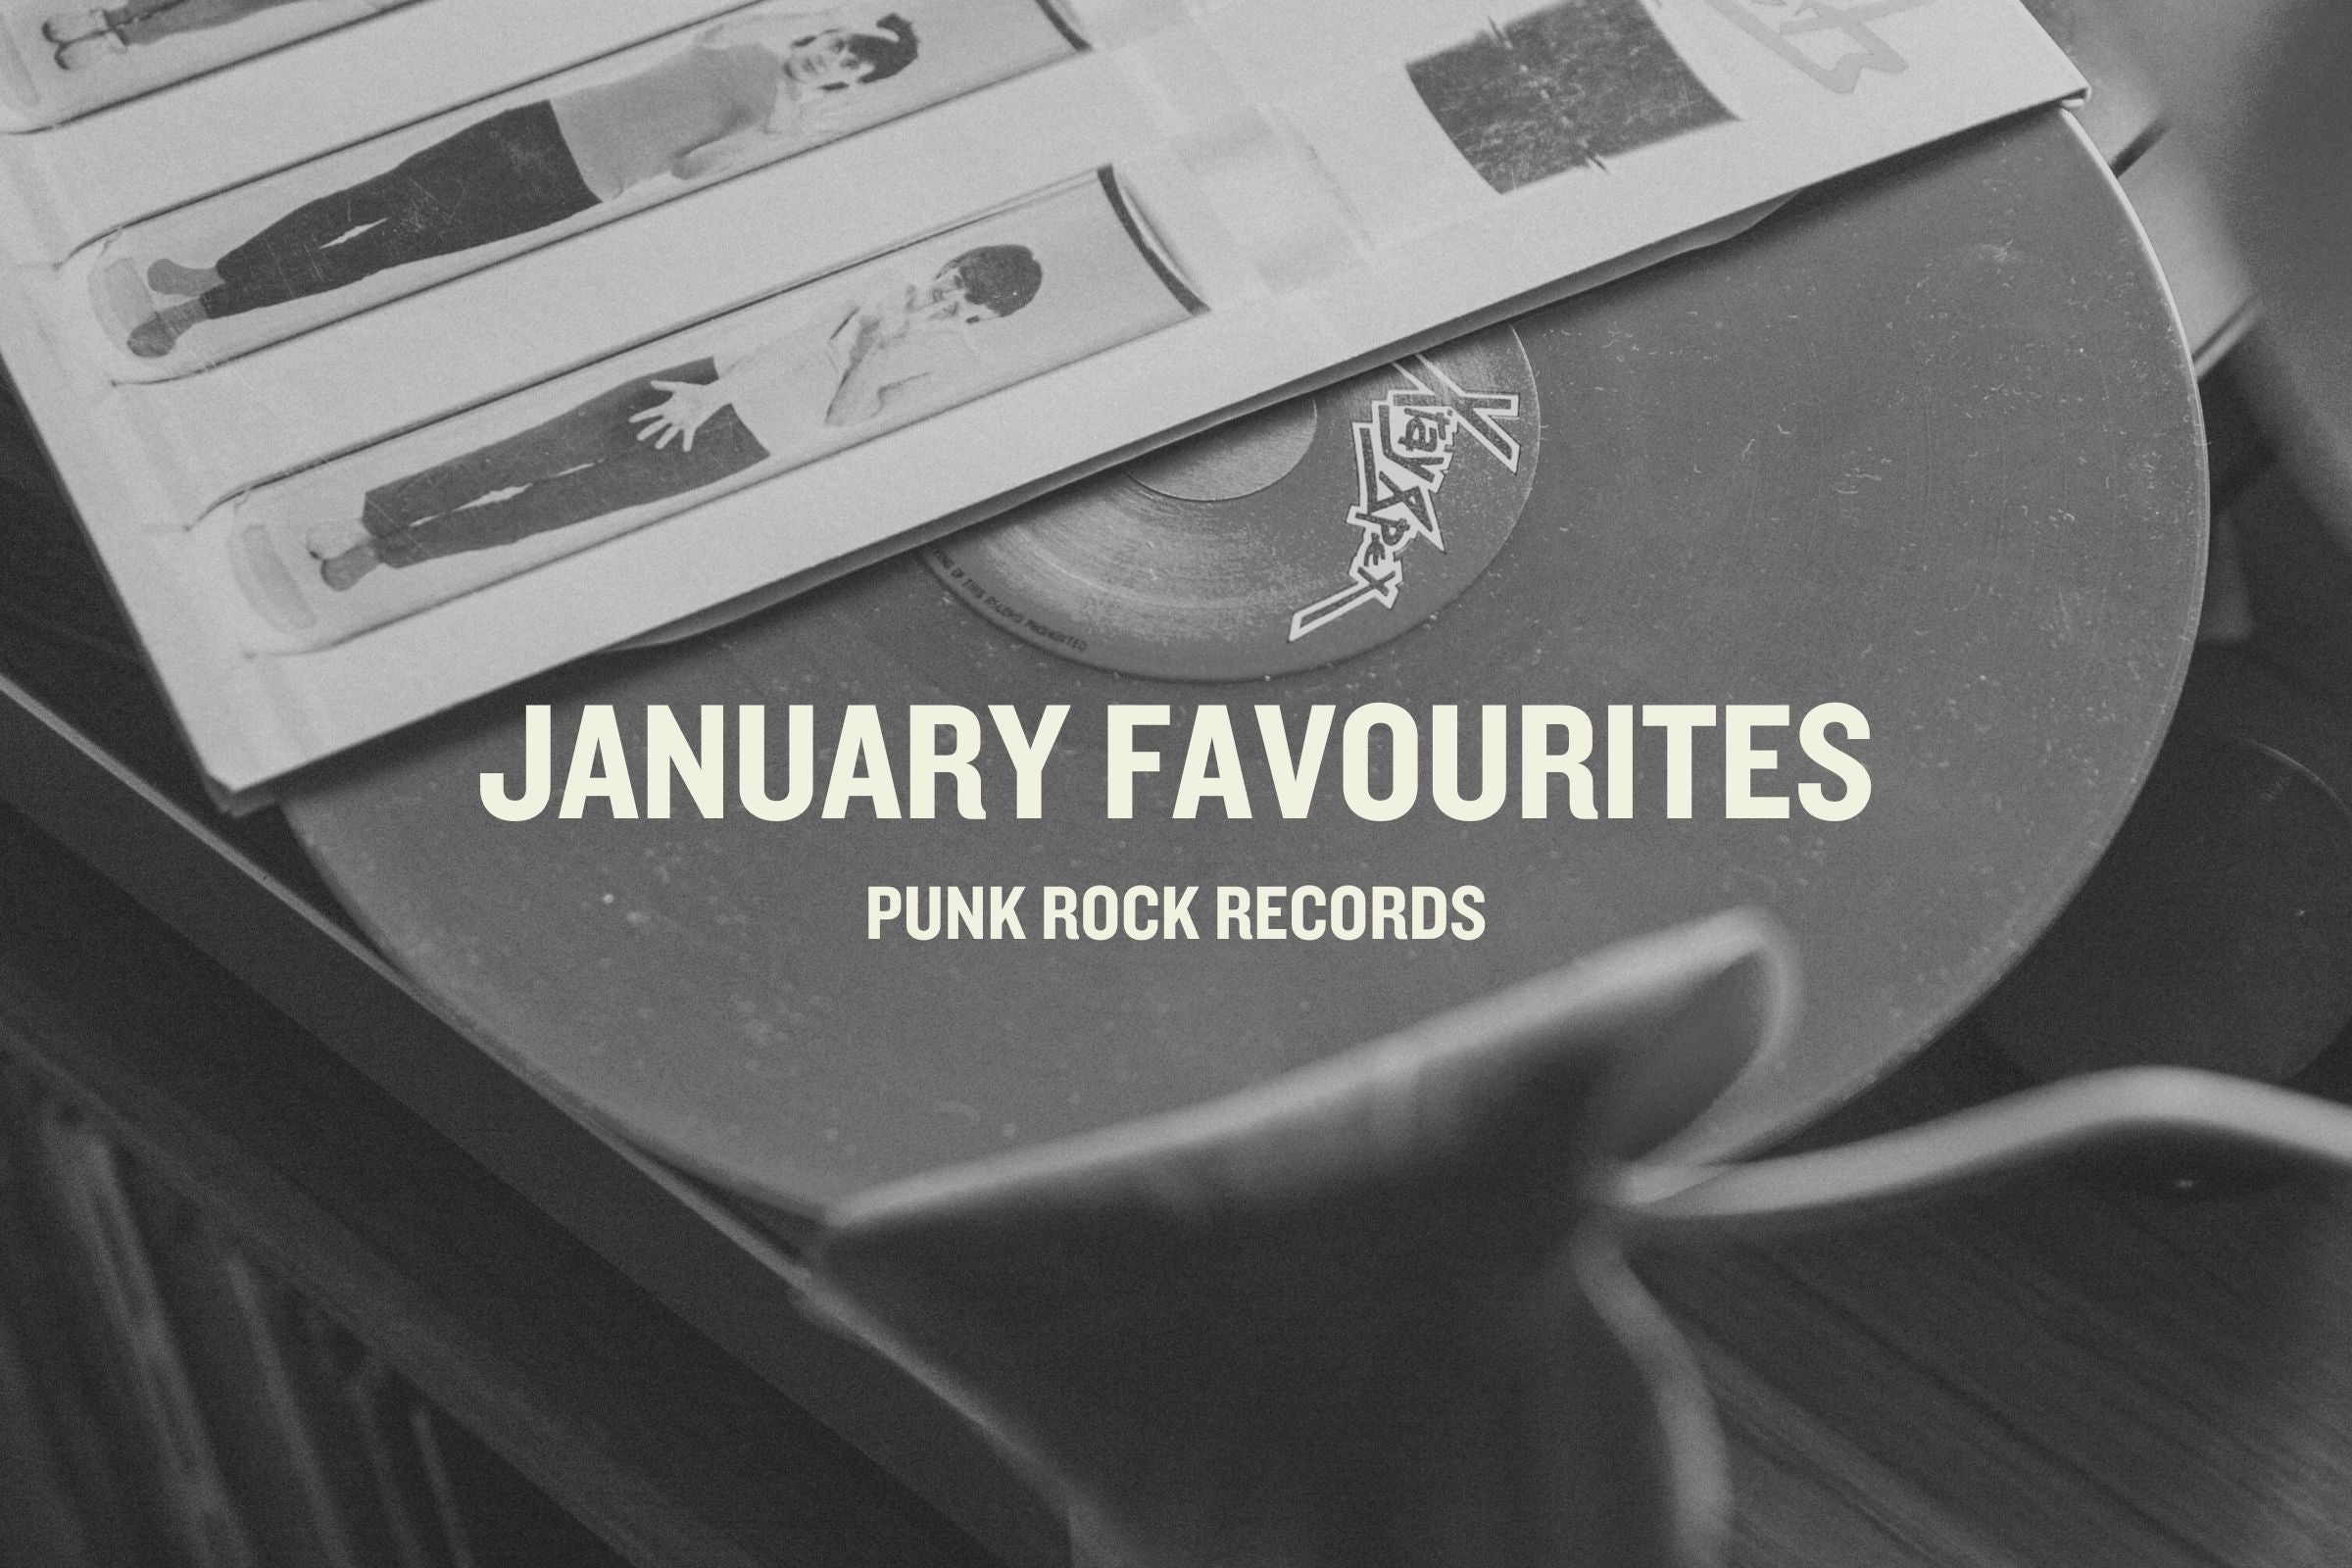 Noskin favourite punk rock records featuring x-ray spex and the jam